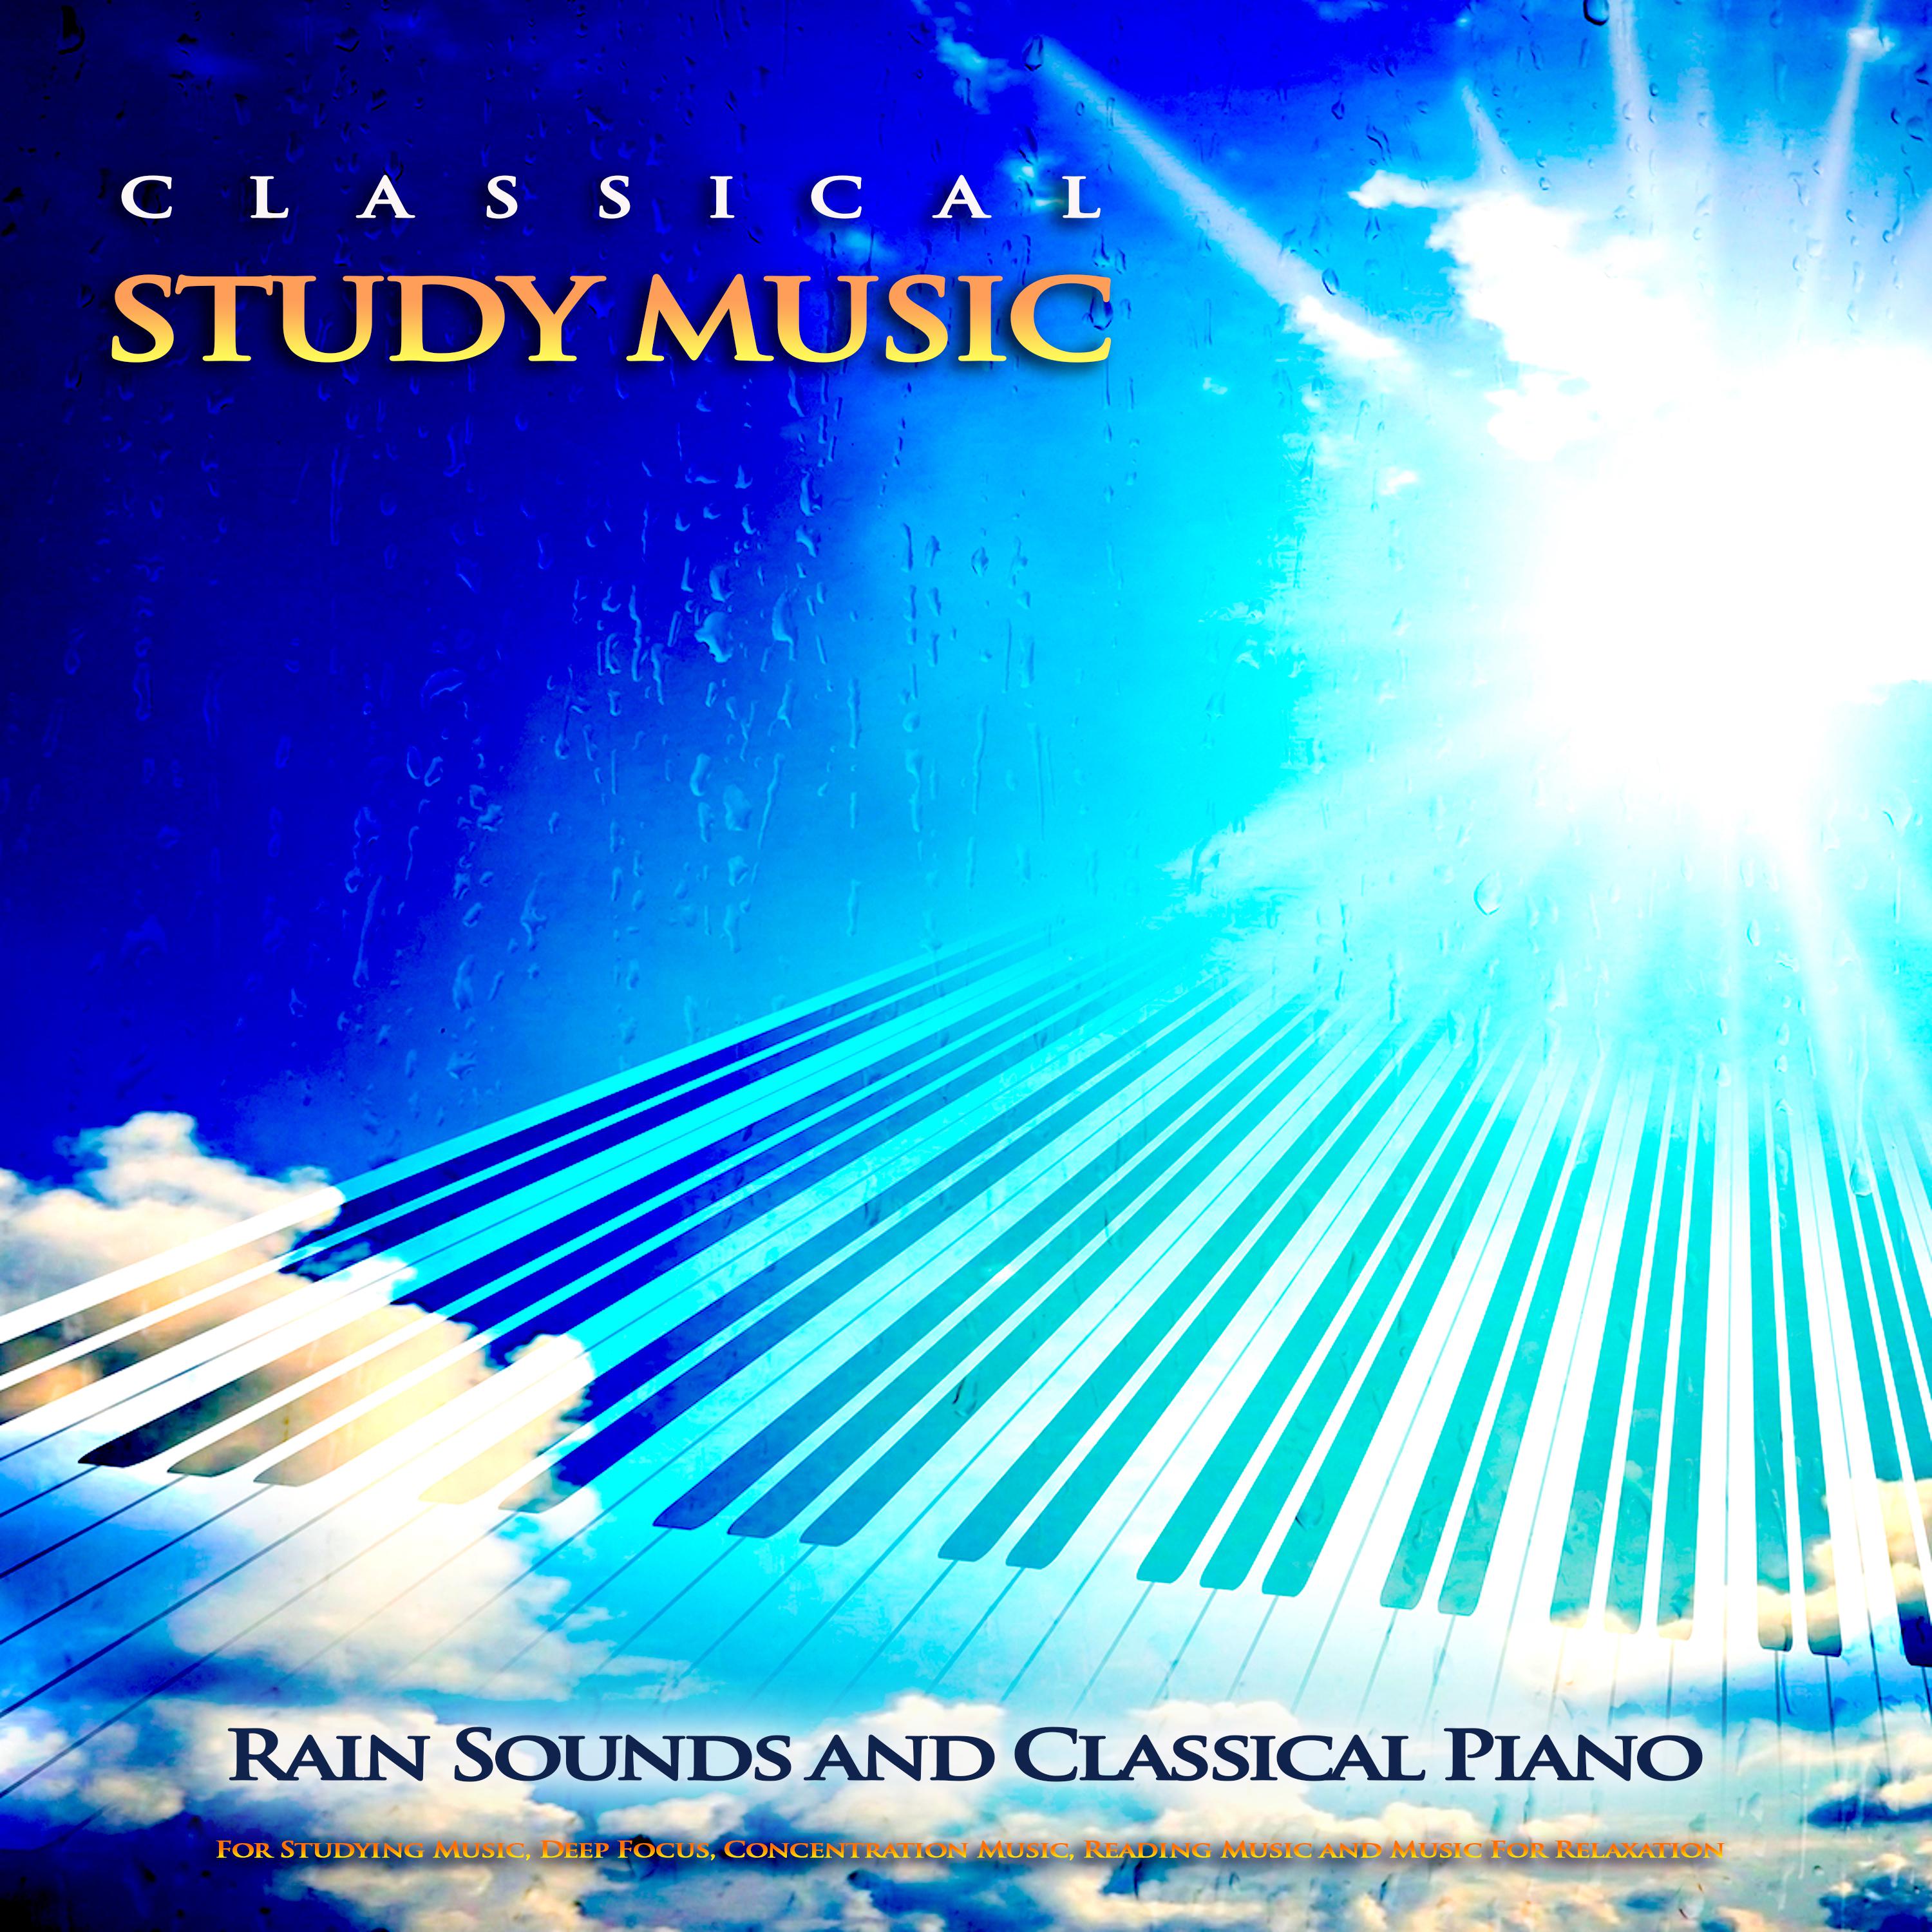 La Fille Aux Cheveux - Debussy - Classical Piano Music and Rain Sounds - Classical Study Music